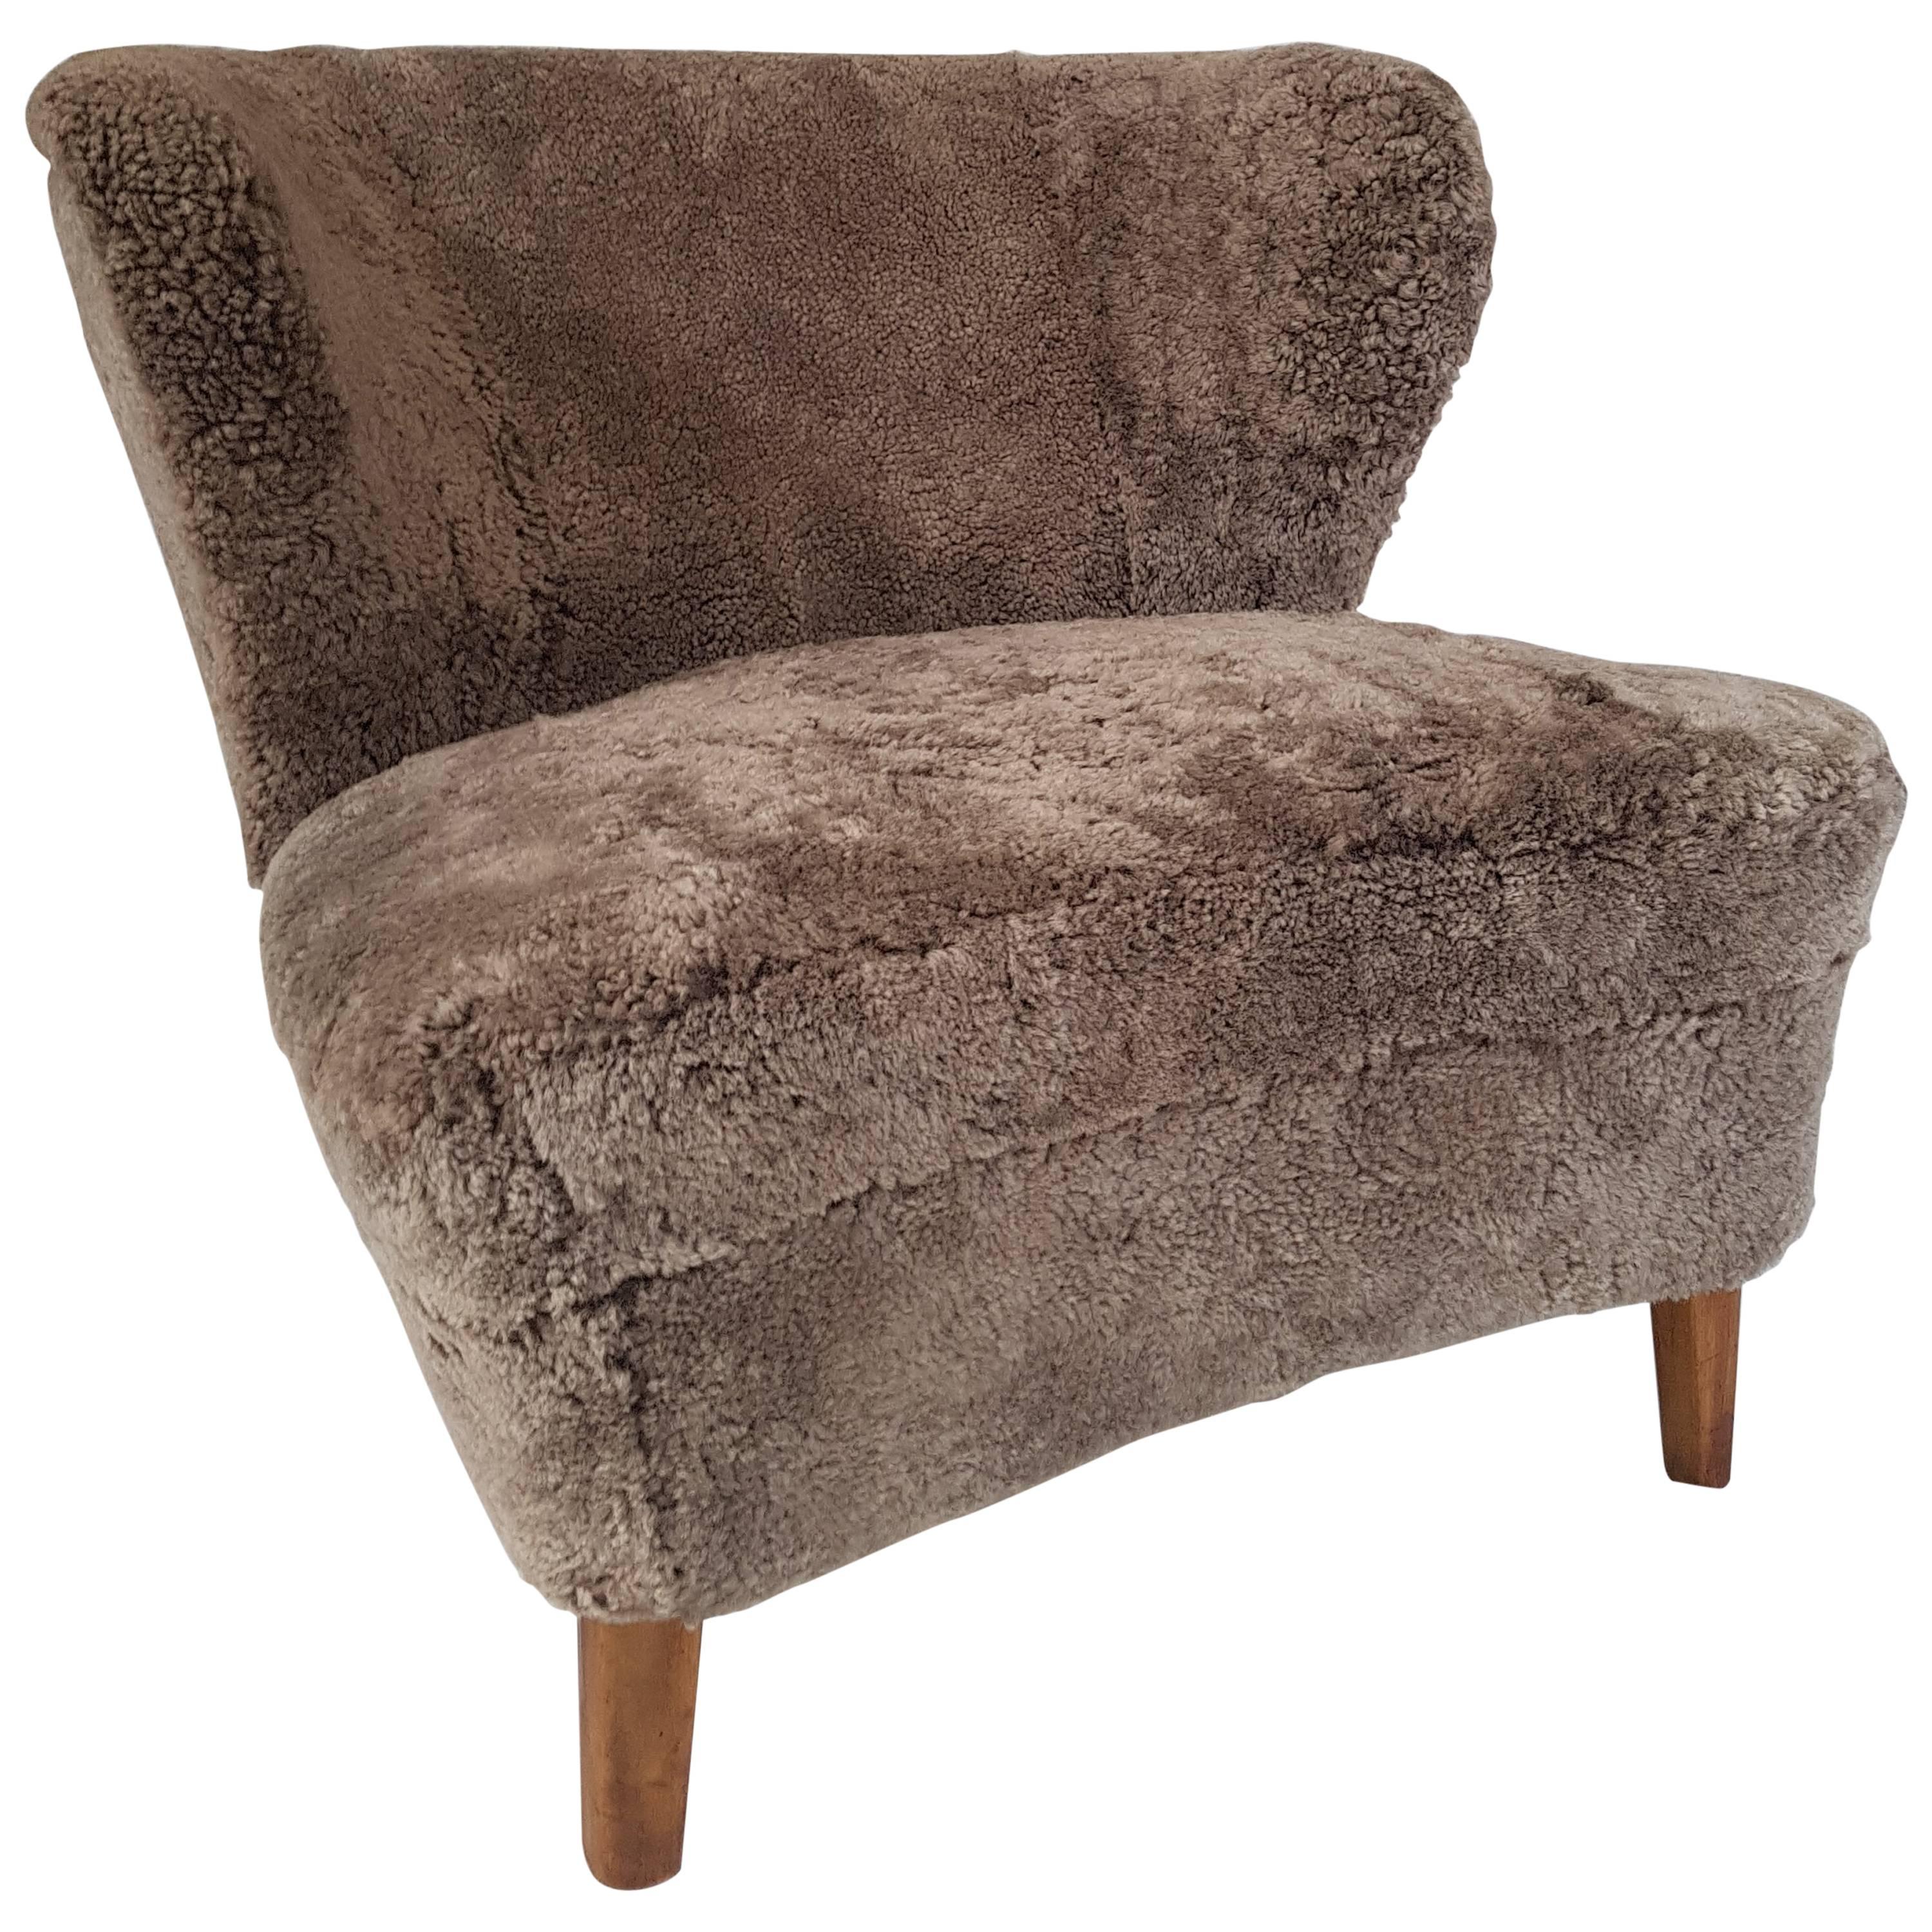 Armchair Gosta Jonsson, circa 1940, Curly Shearling Upholstery